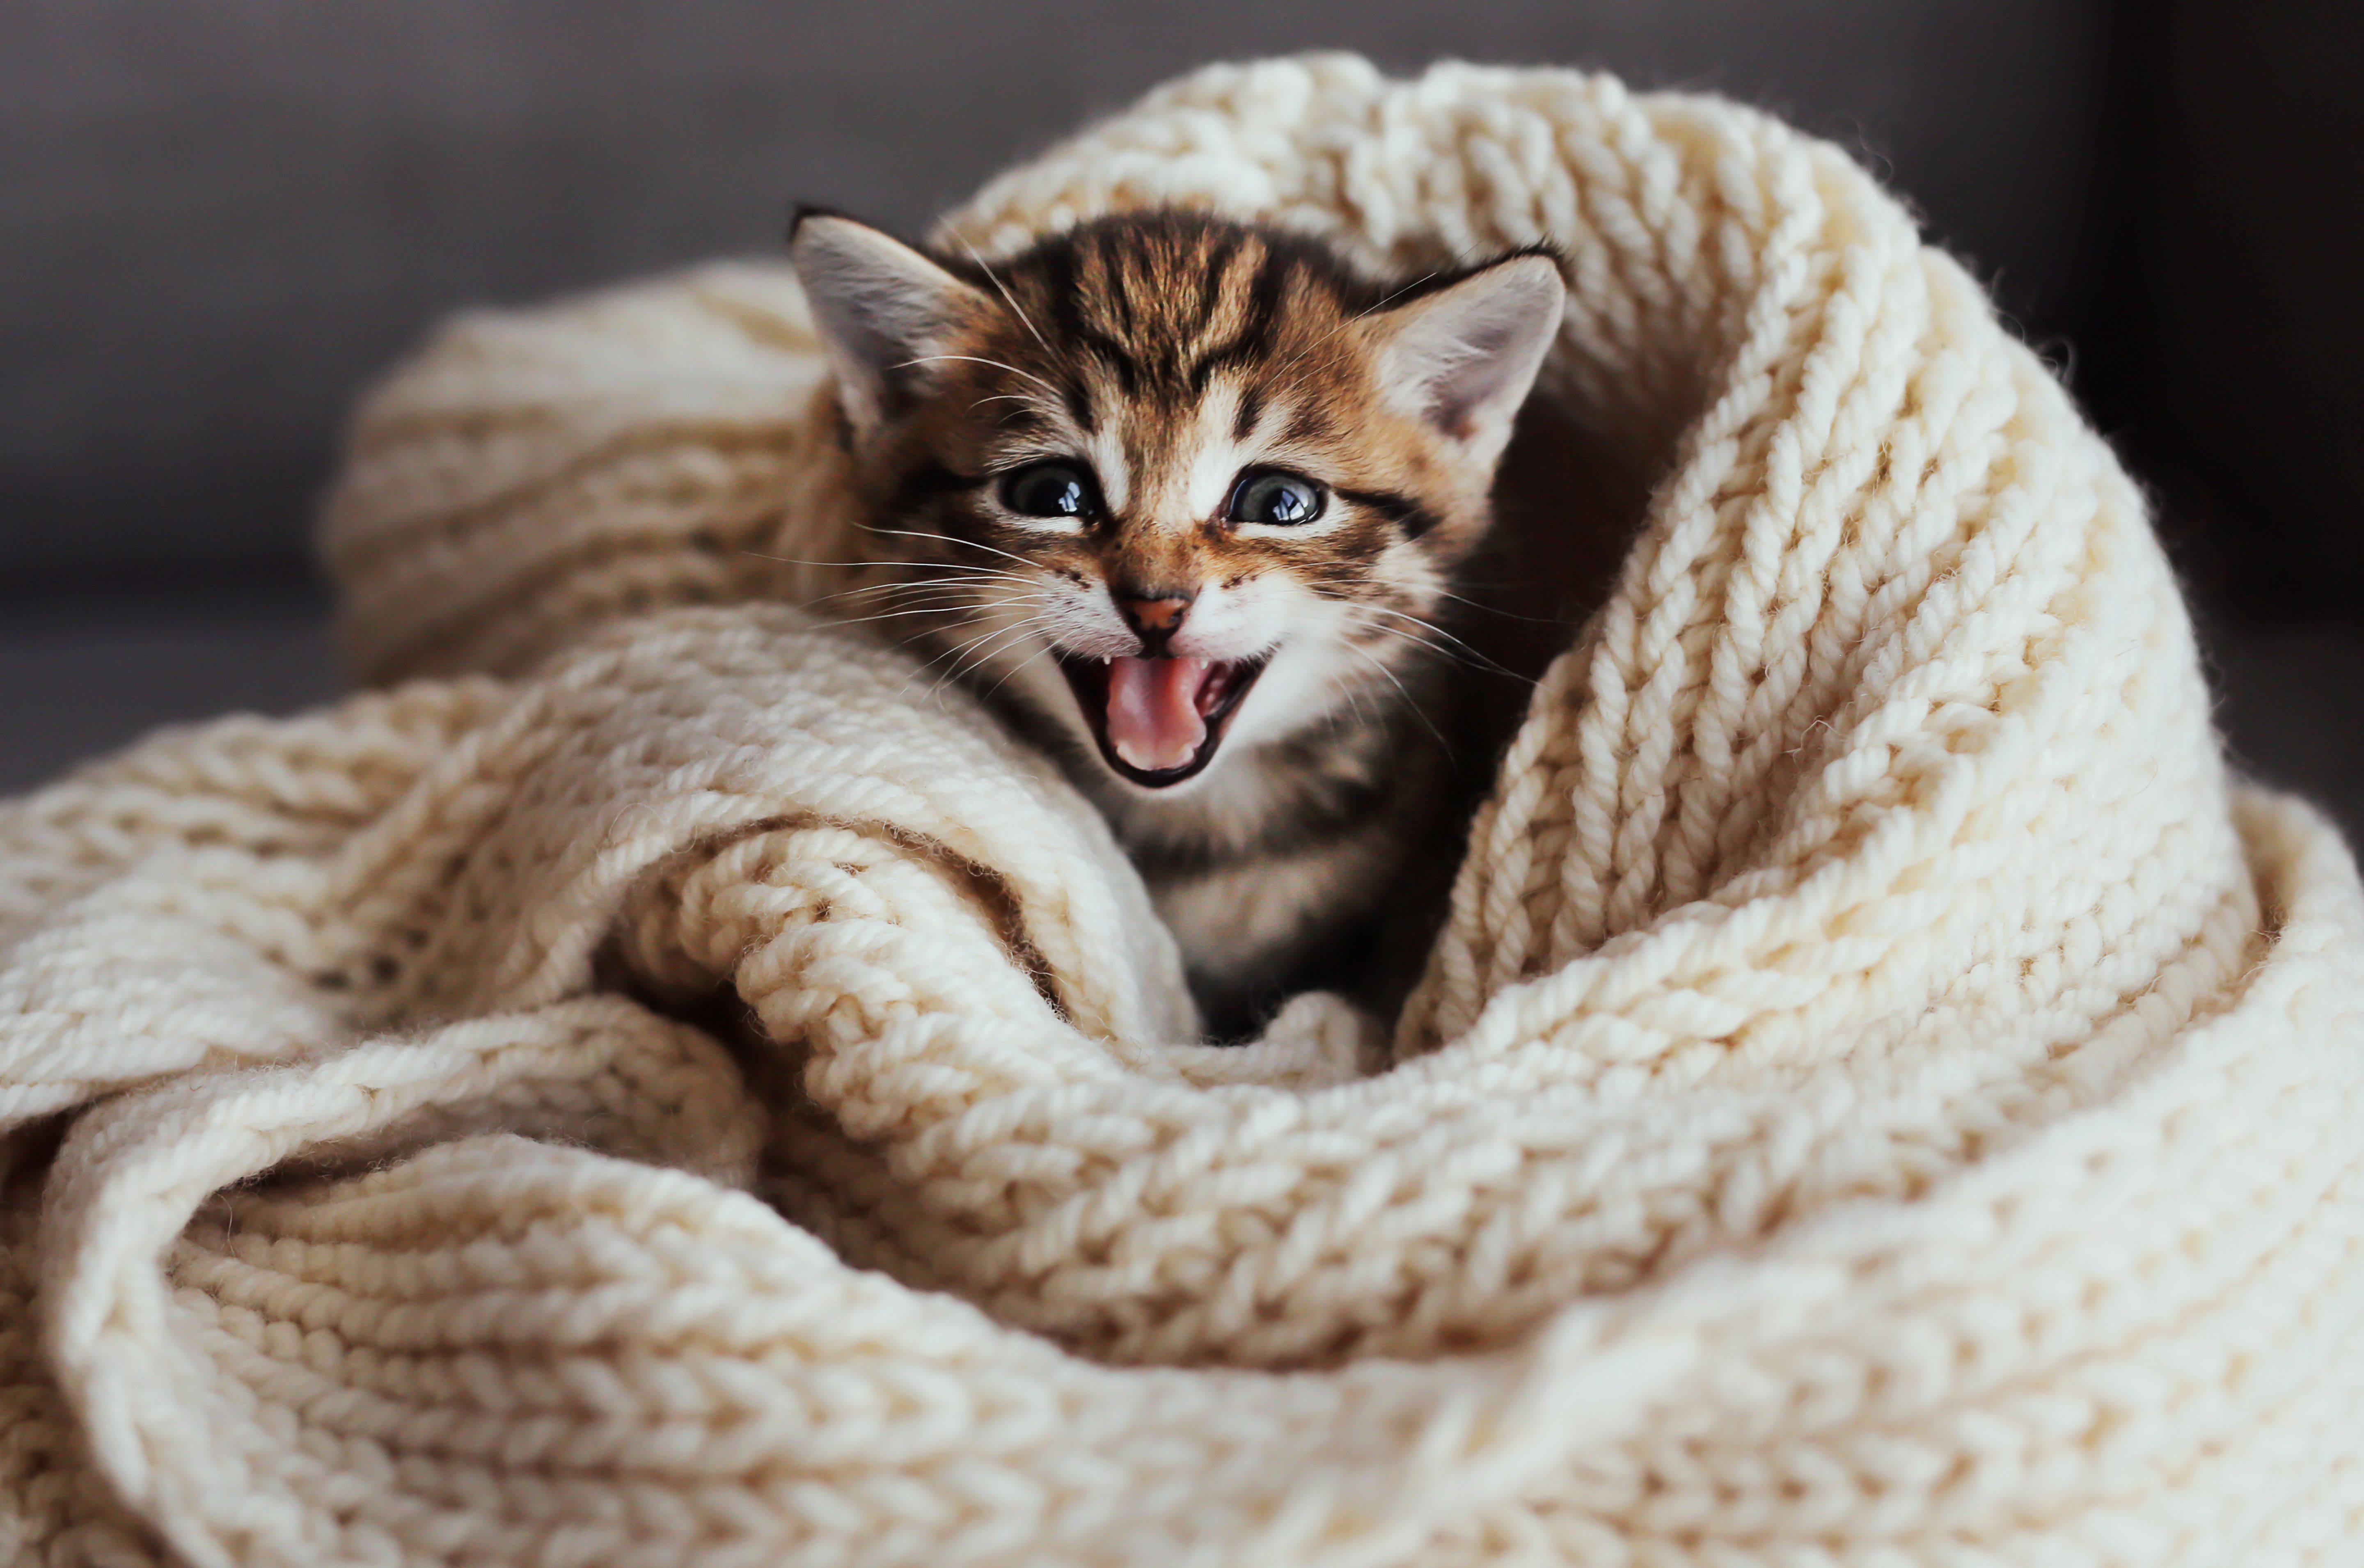 25 Best Cat Quotes That Perfectly Describe Your Kitten - Funny and ...